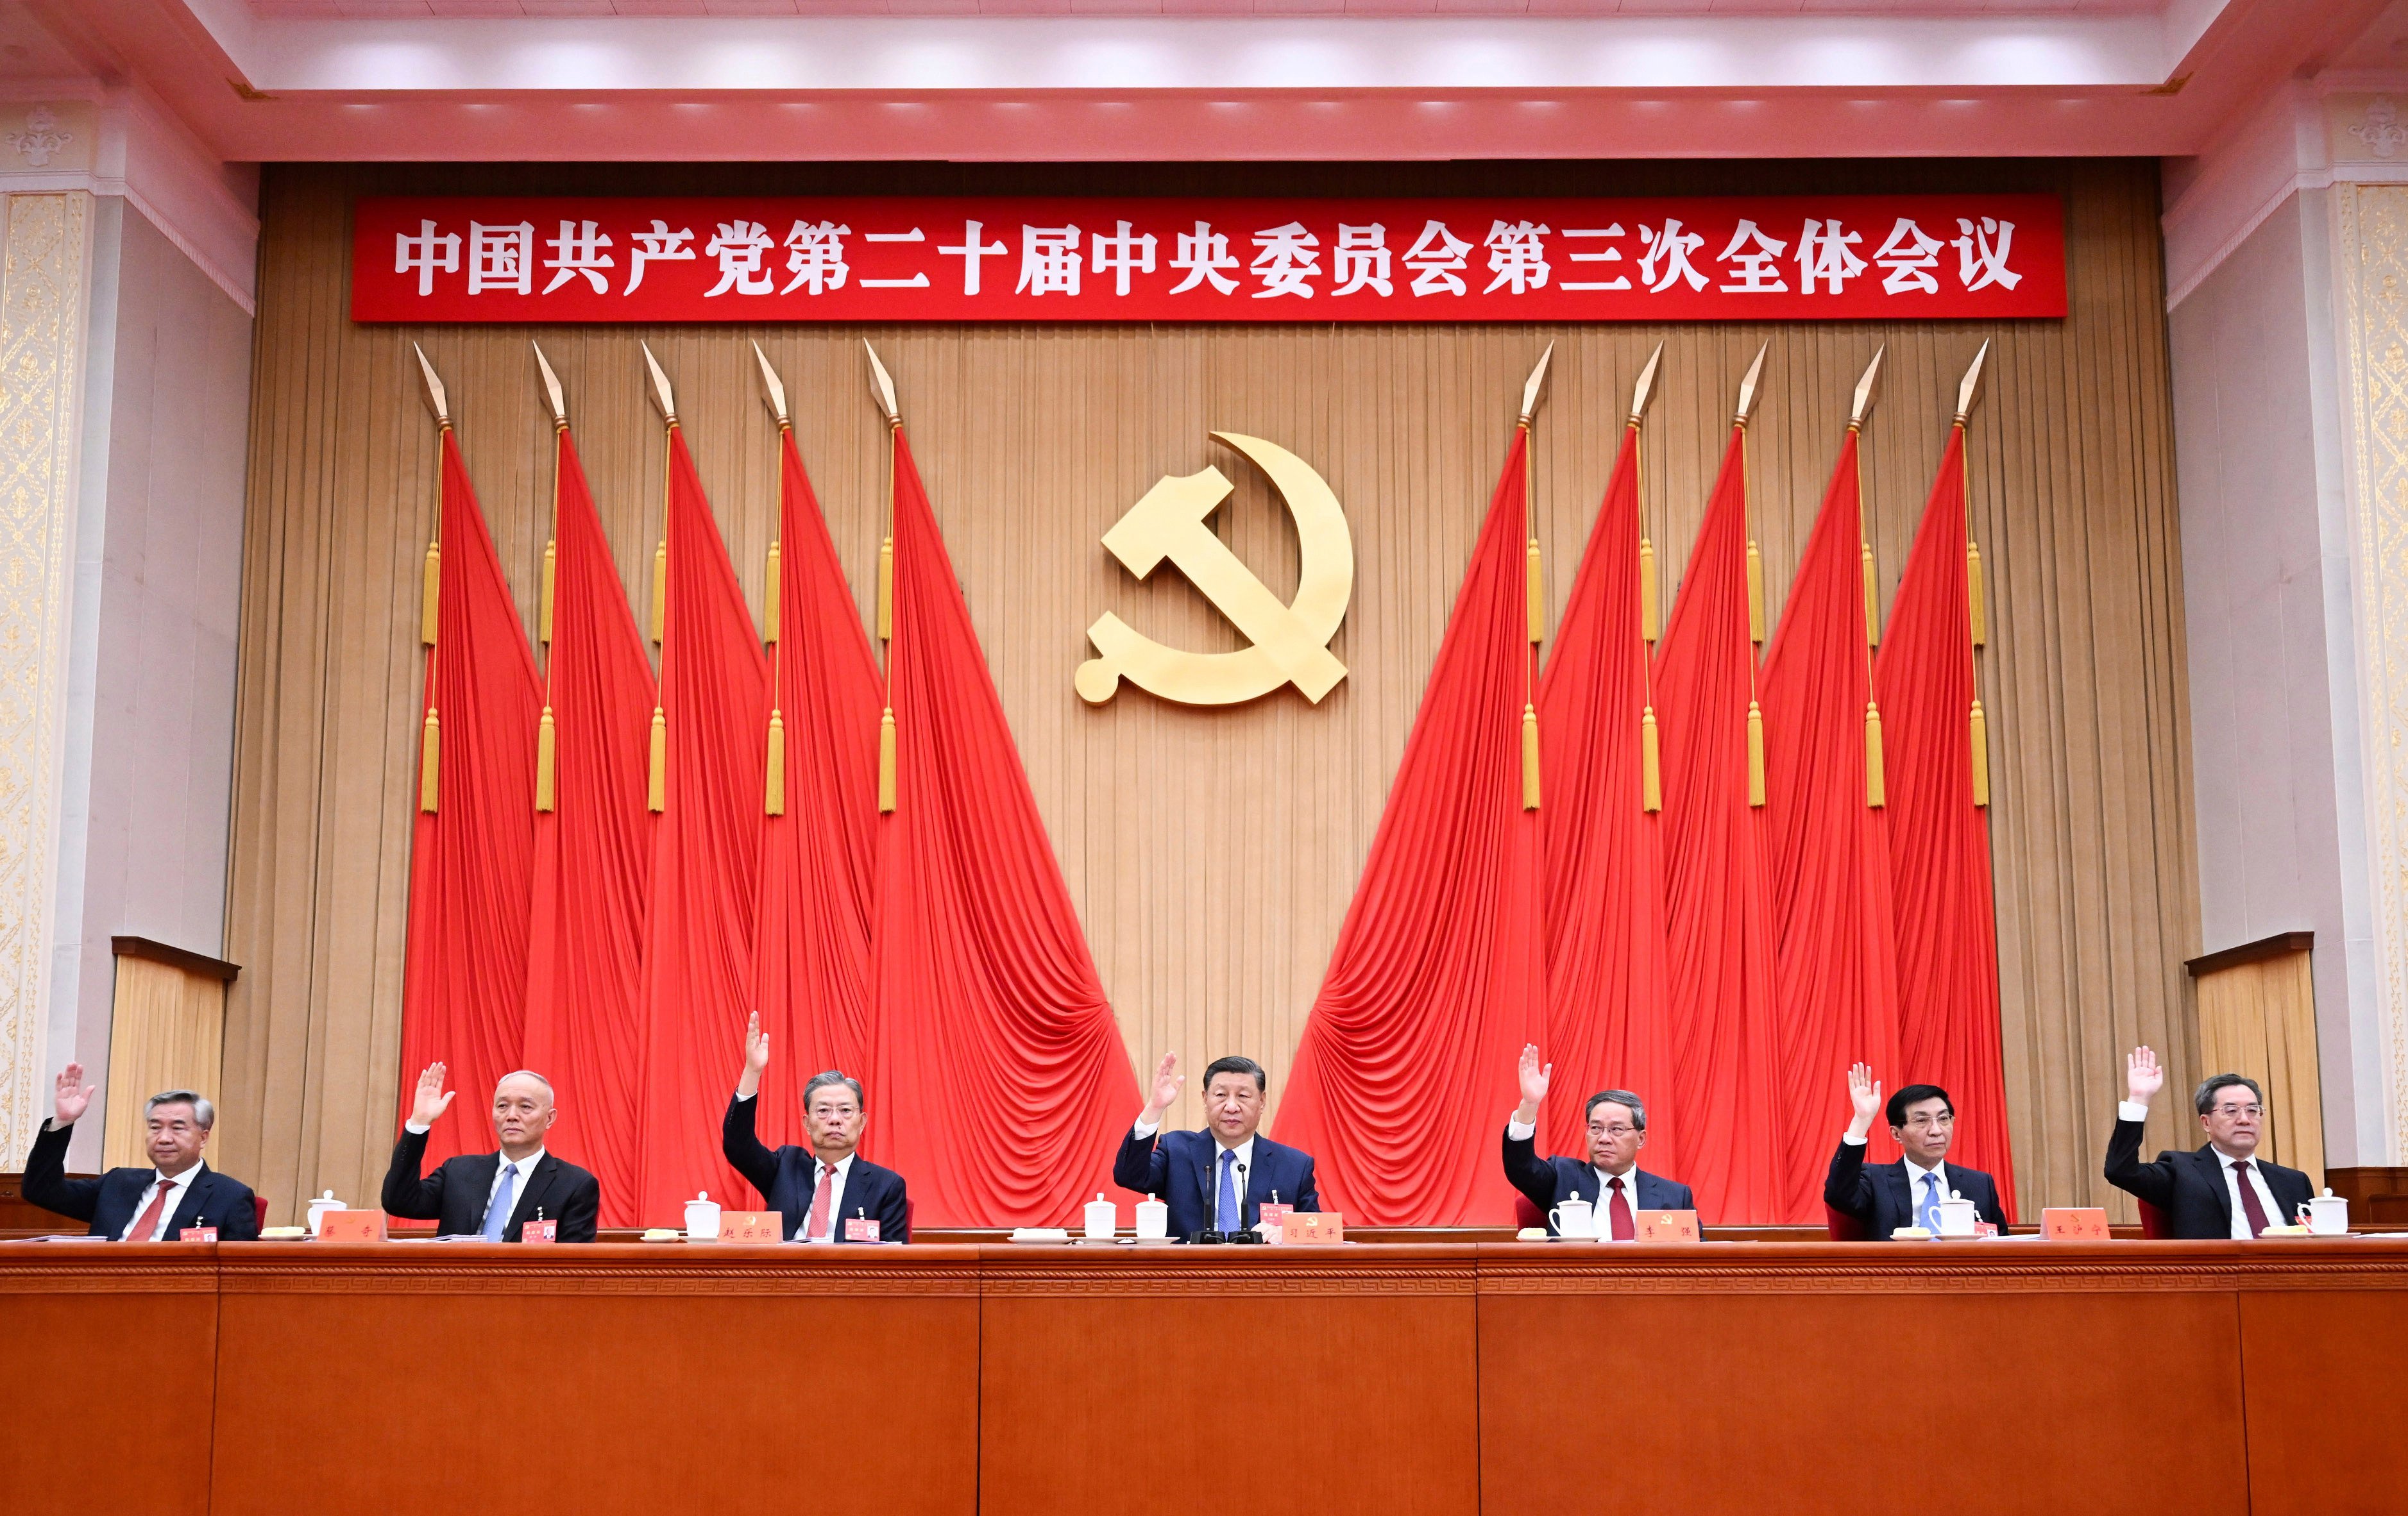 Top leaders attend the third plenary session of the 20th Communist Party of China Central Committee in Beijing. Photo: AP